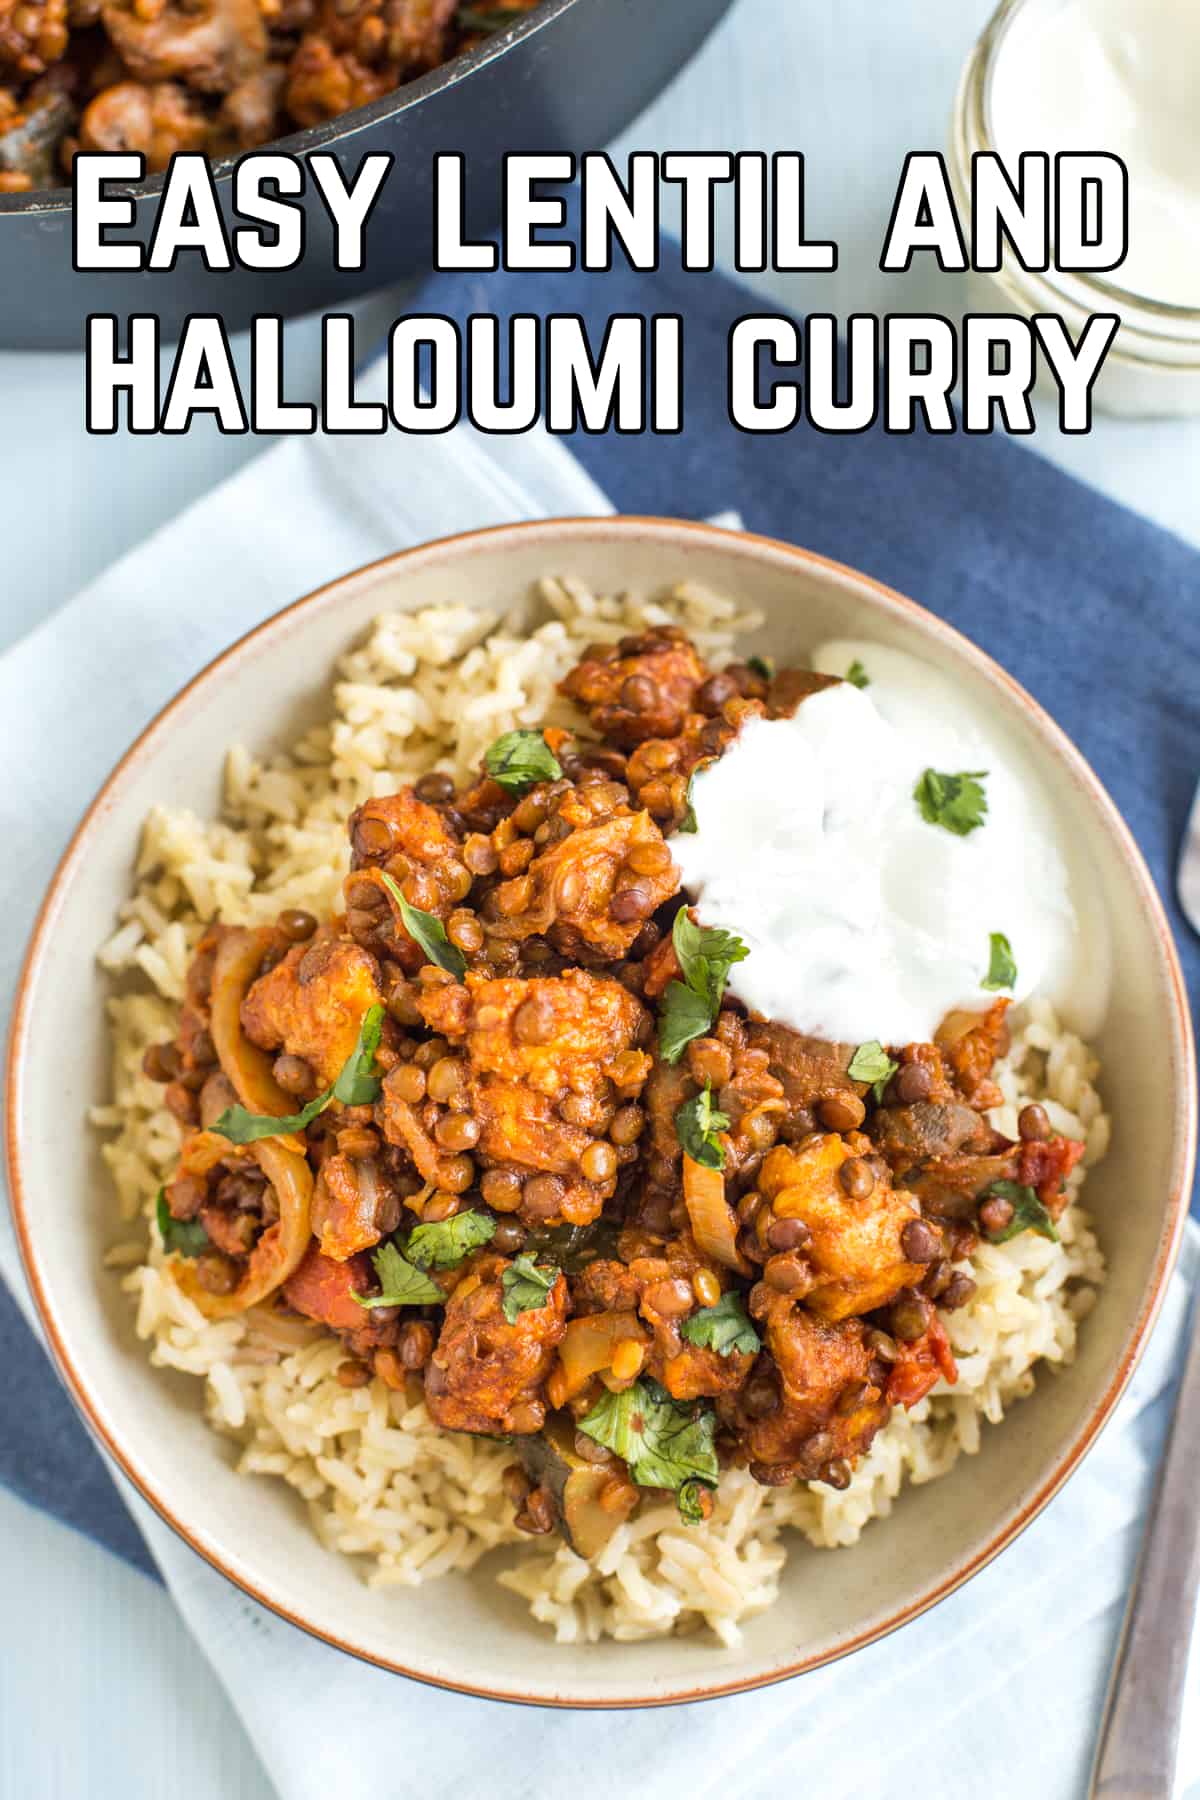 Portion of lentil and halloumi curry in a bowl with rice and yogurt